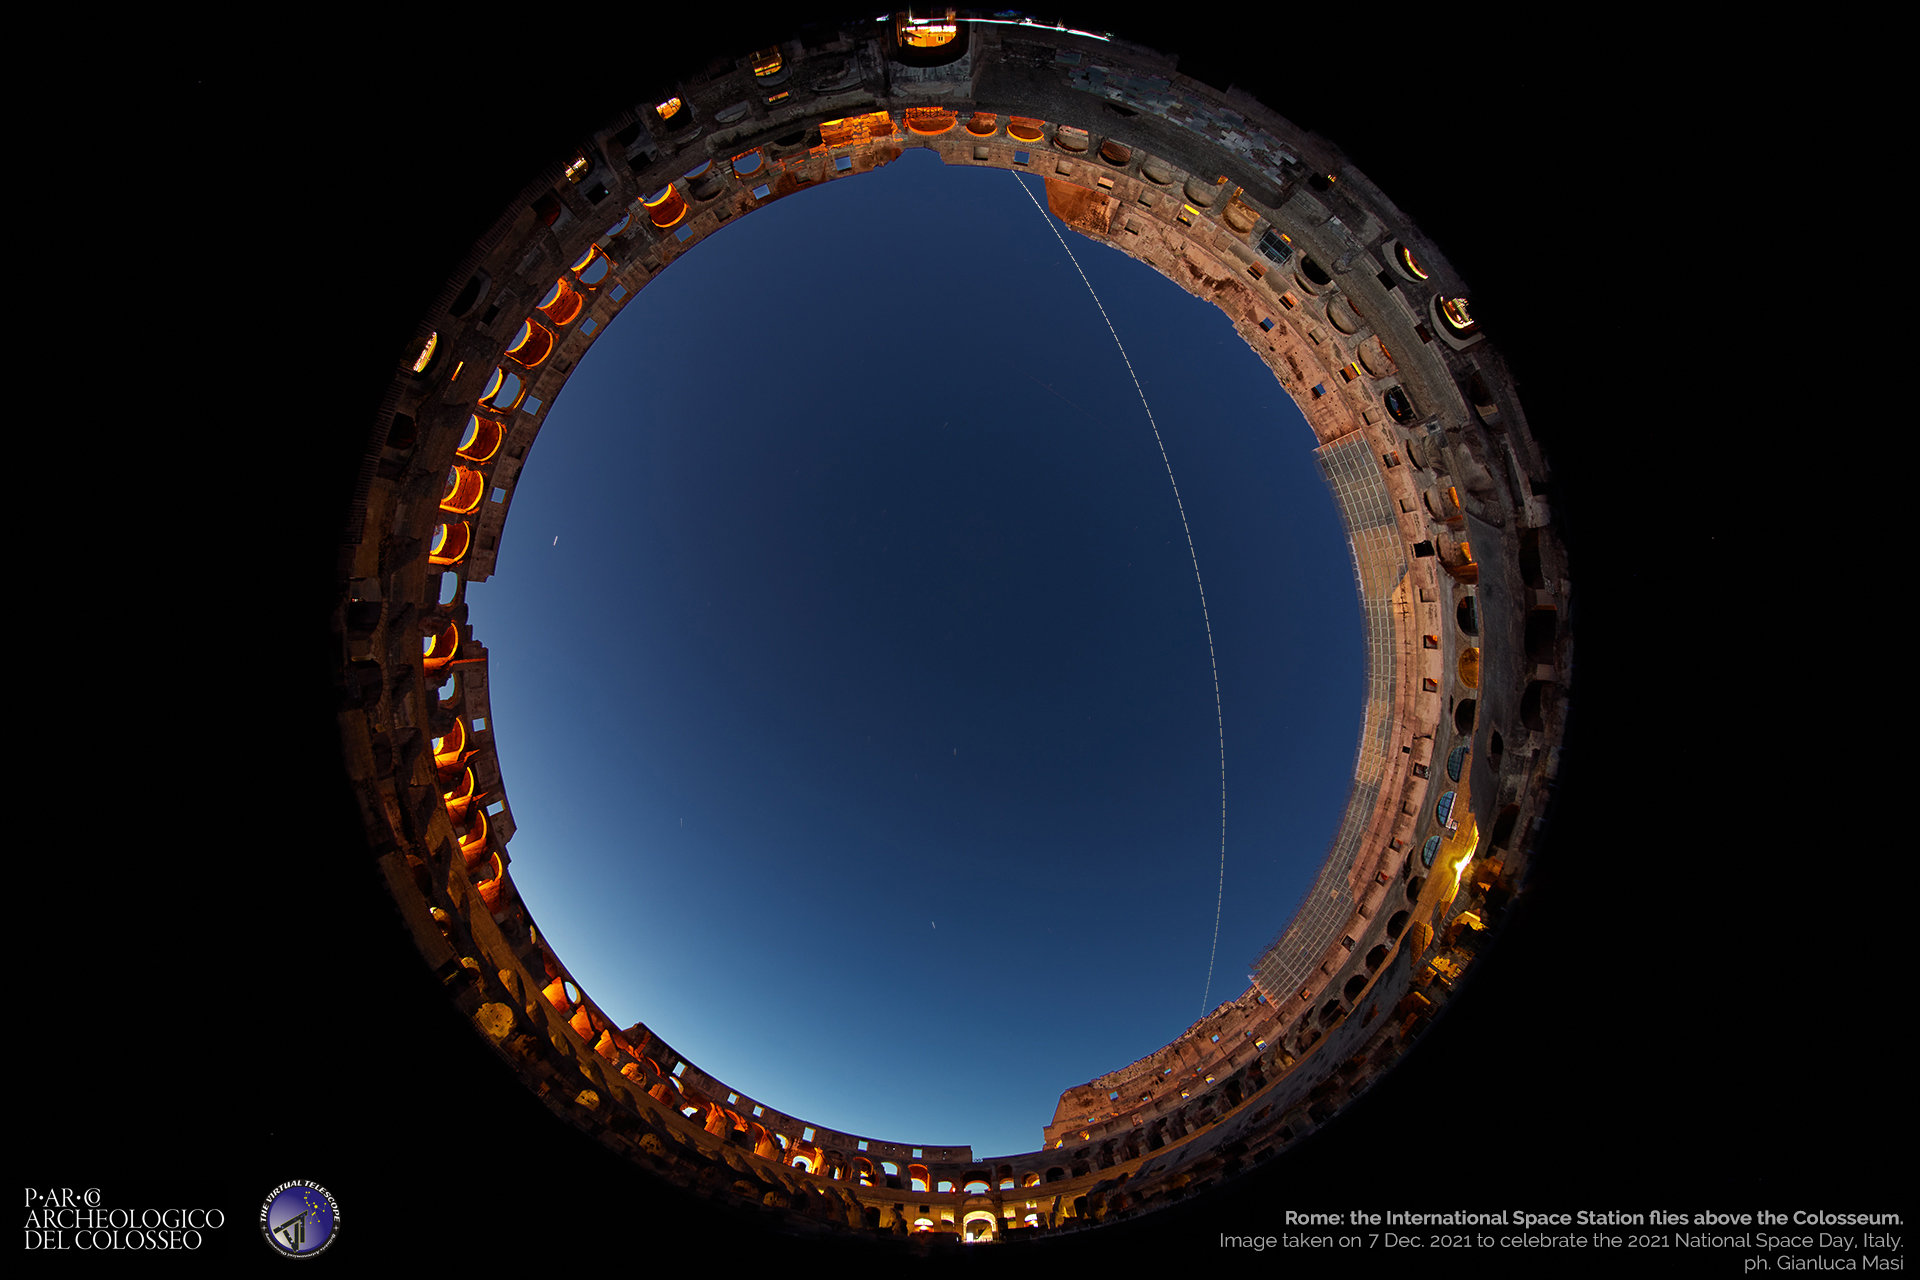 The International Space Station flies above the Colosseum soon after sunset. 7 Dec. 2021.